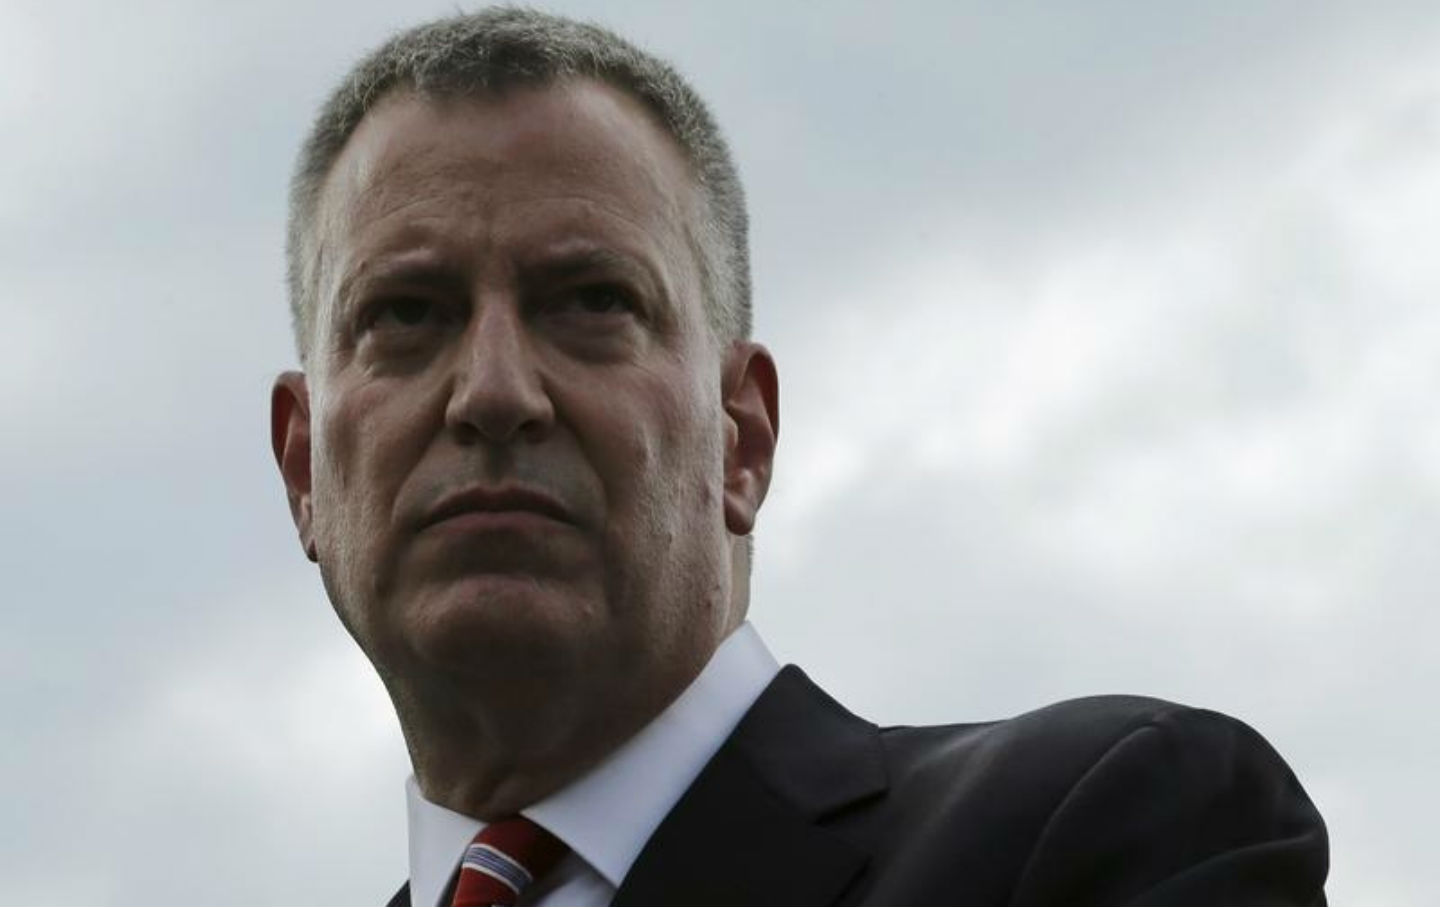 Bill de Blasio on the Crisis of Inequality and the Blind Spots of the Democratic Party